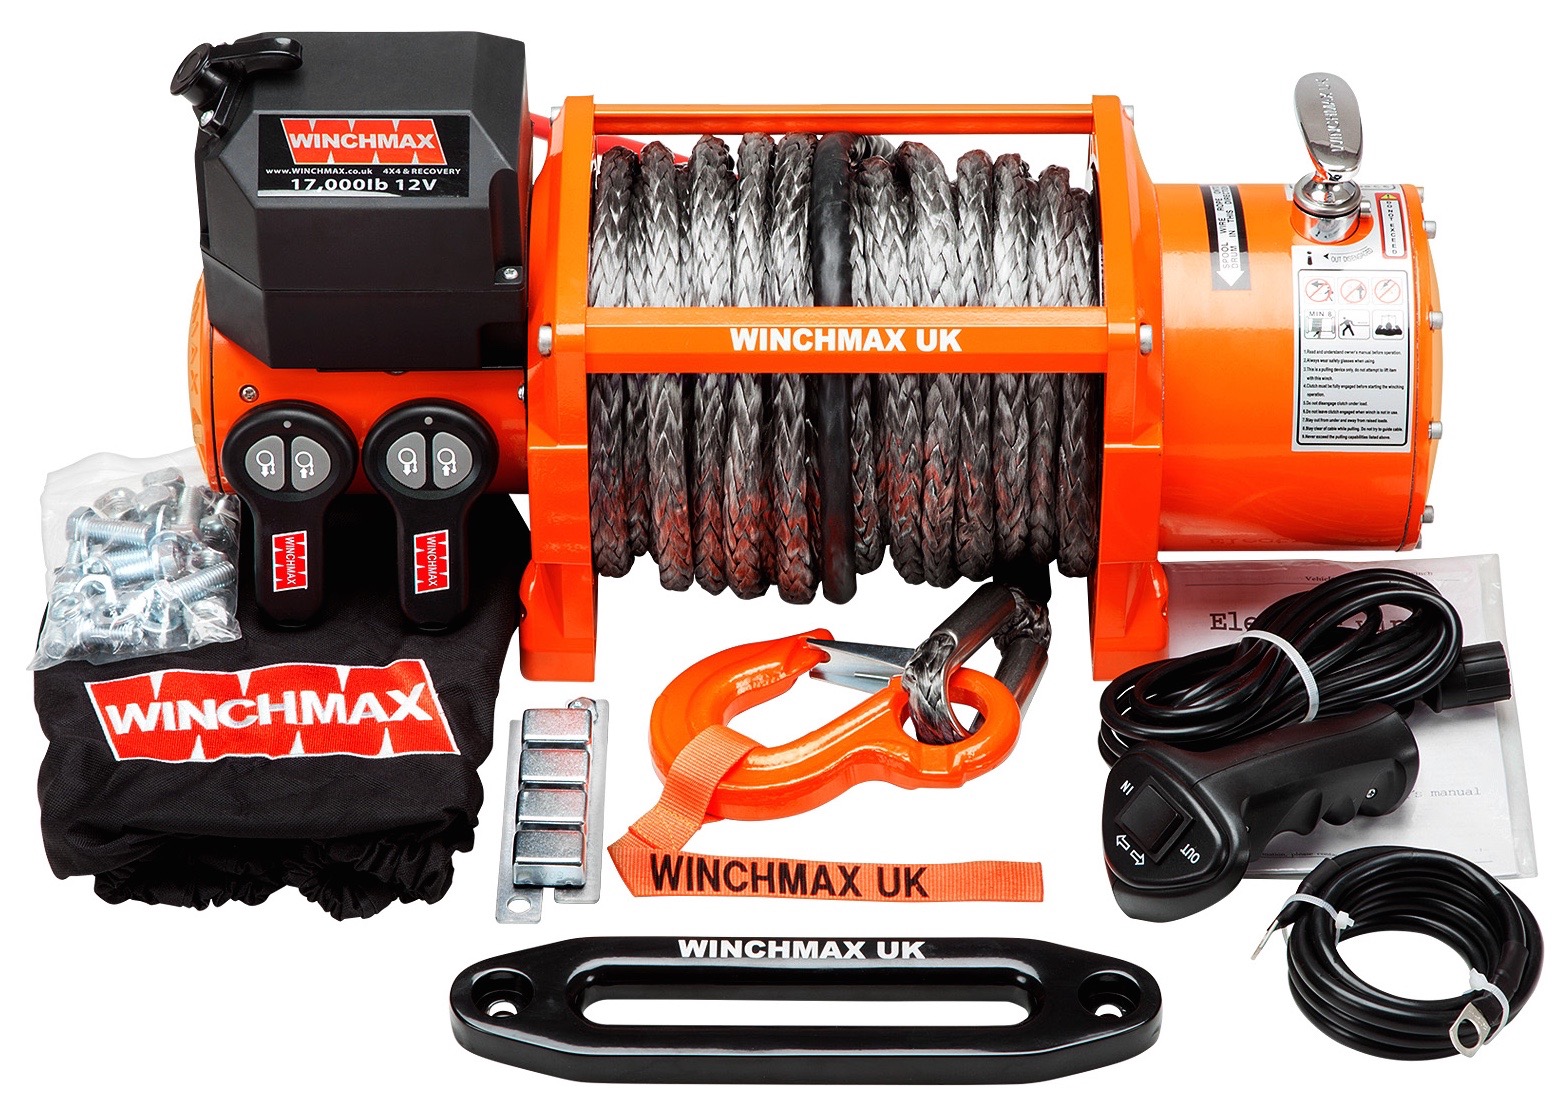 WINCHMAX 17000LB 12V ELECTRIC WINCH DYNEEMA ROPE WITH WIRELESS REMOTES